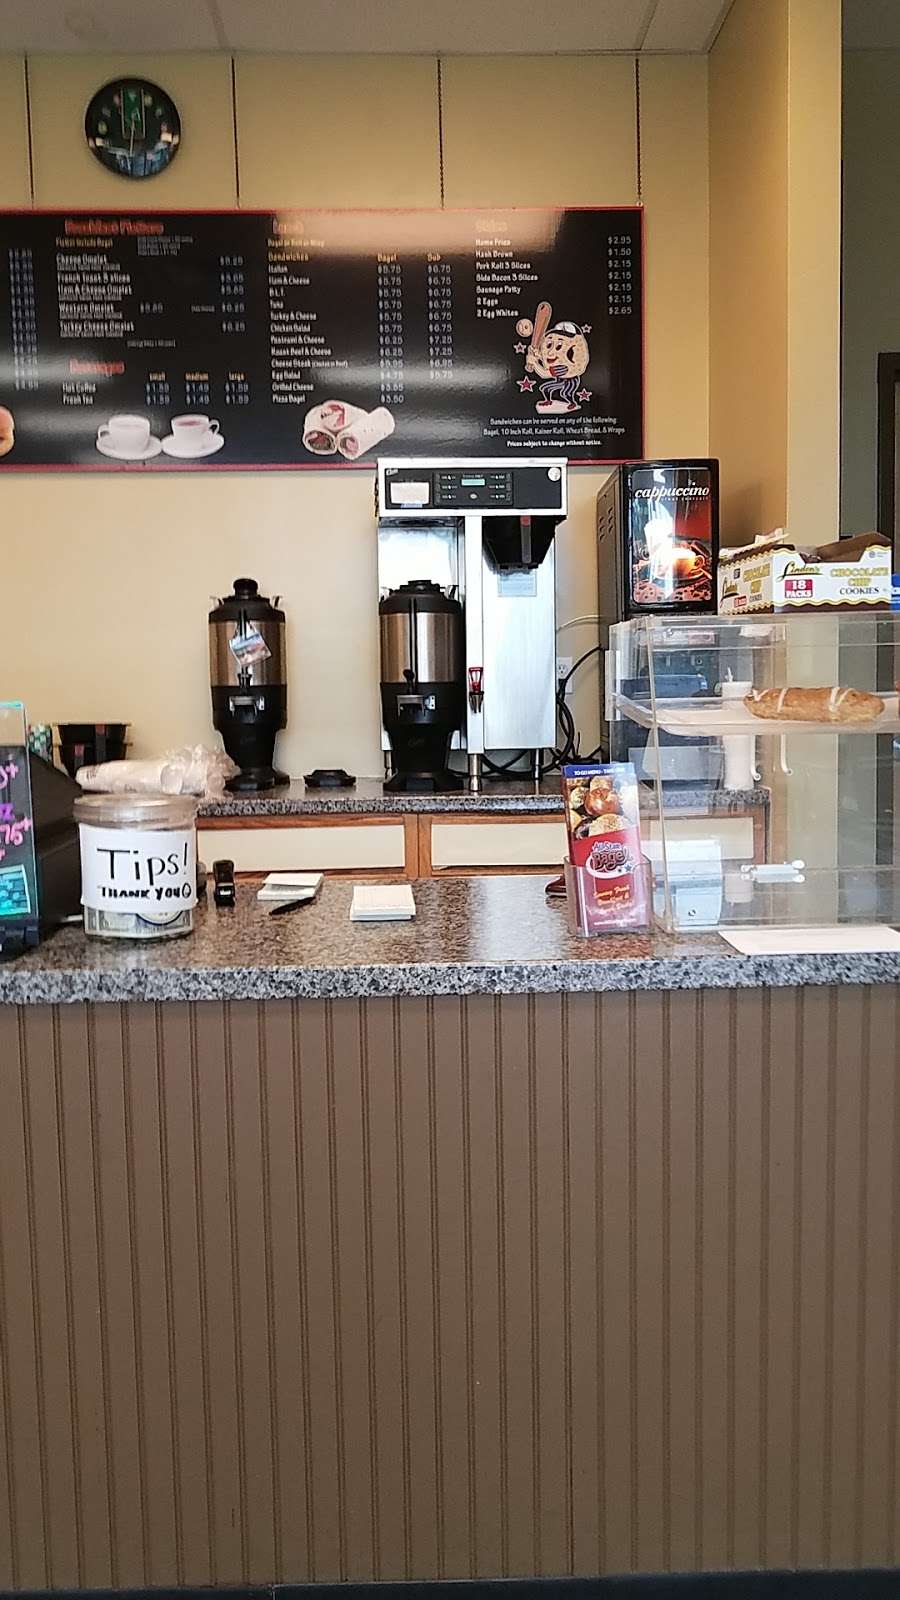 All star bagel | 1900 Rte 37 W, Manchester Township, NJ 08759, USA | Phone: (732) 323-1735